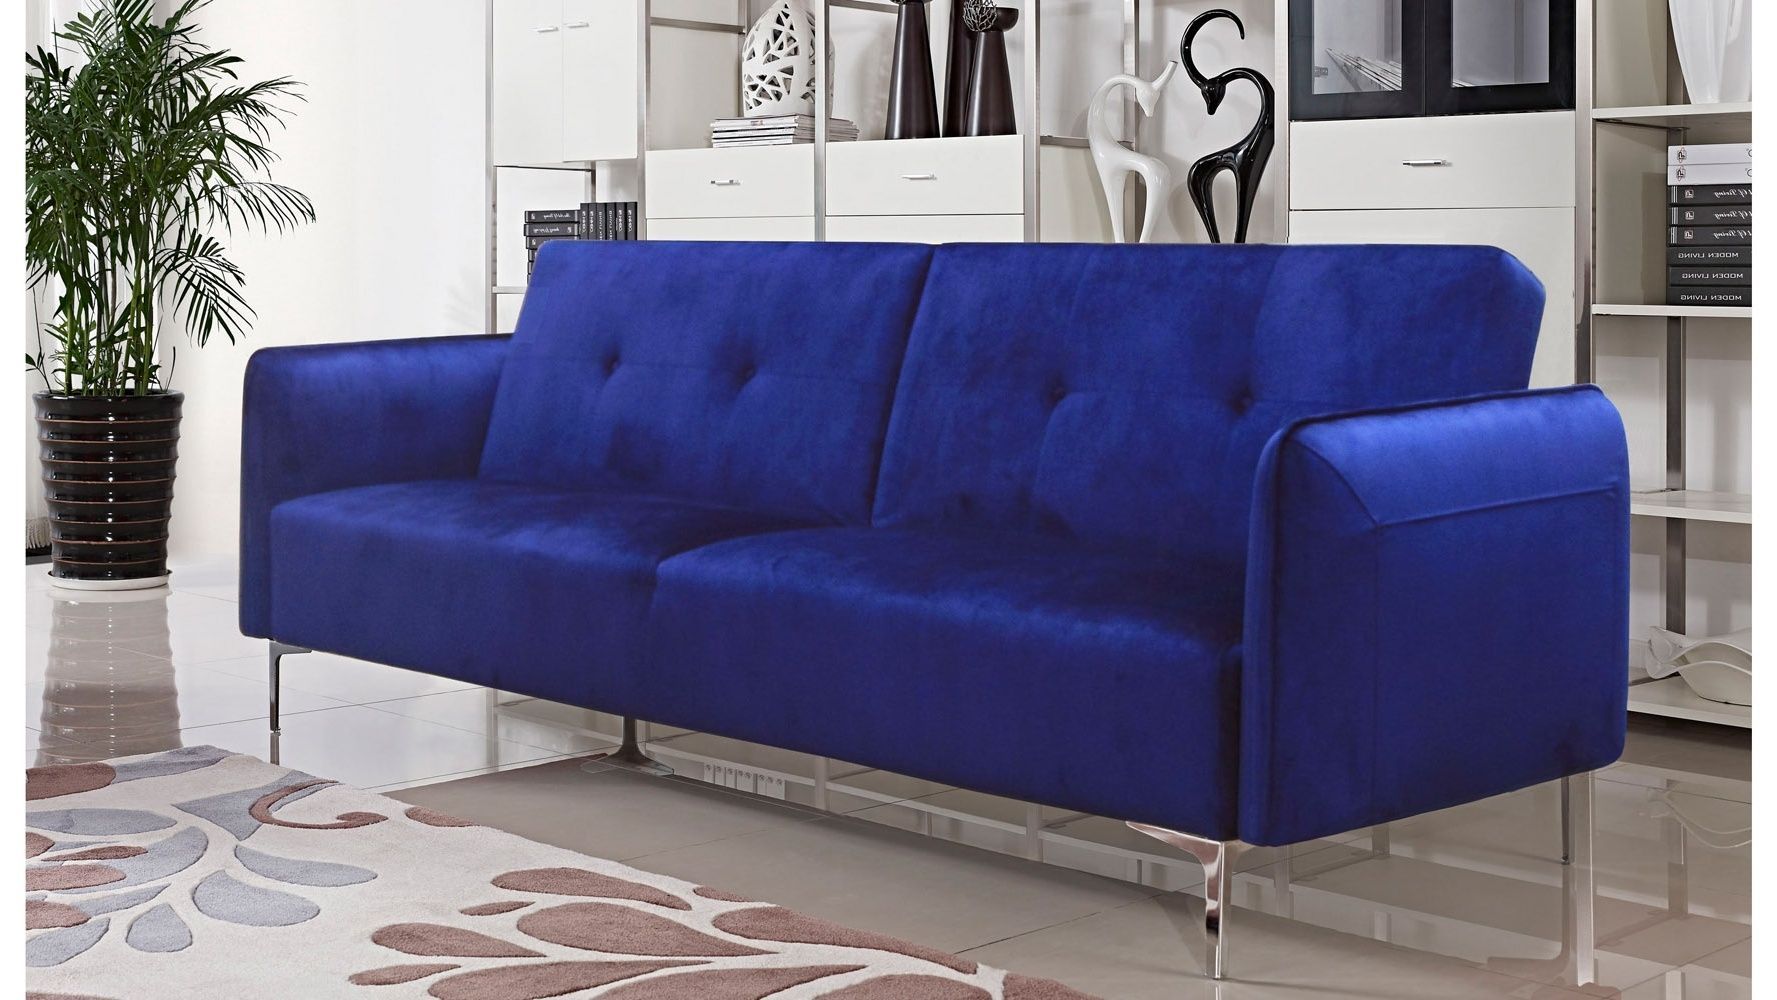 Cobalt Blue Couch | Blue Couches, Couch, Home Throughout Cobalt Console Tables (Gallery 19 of 20)